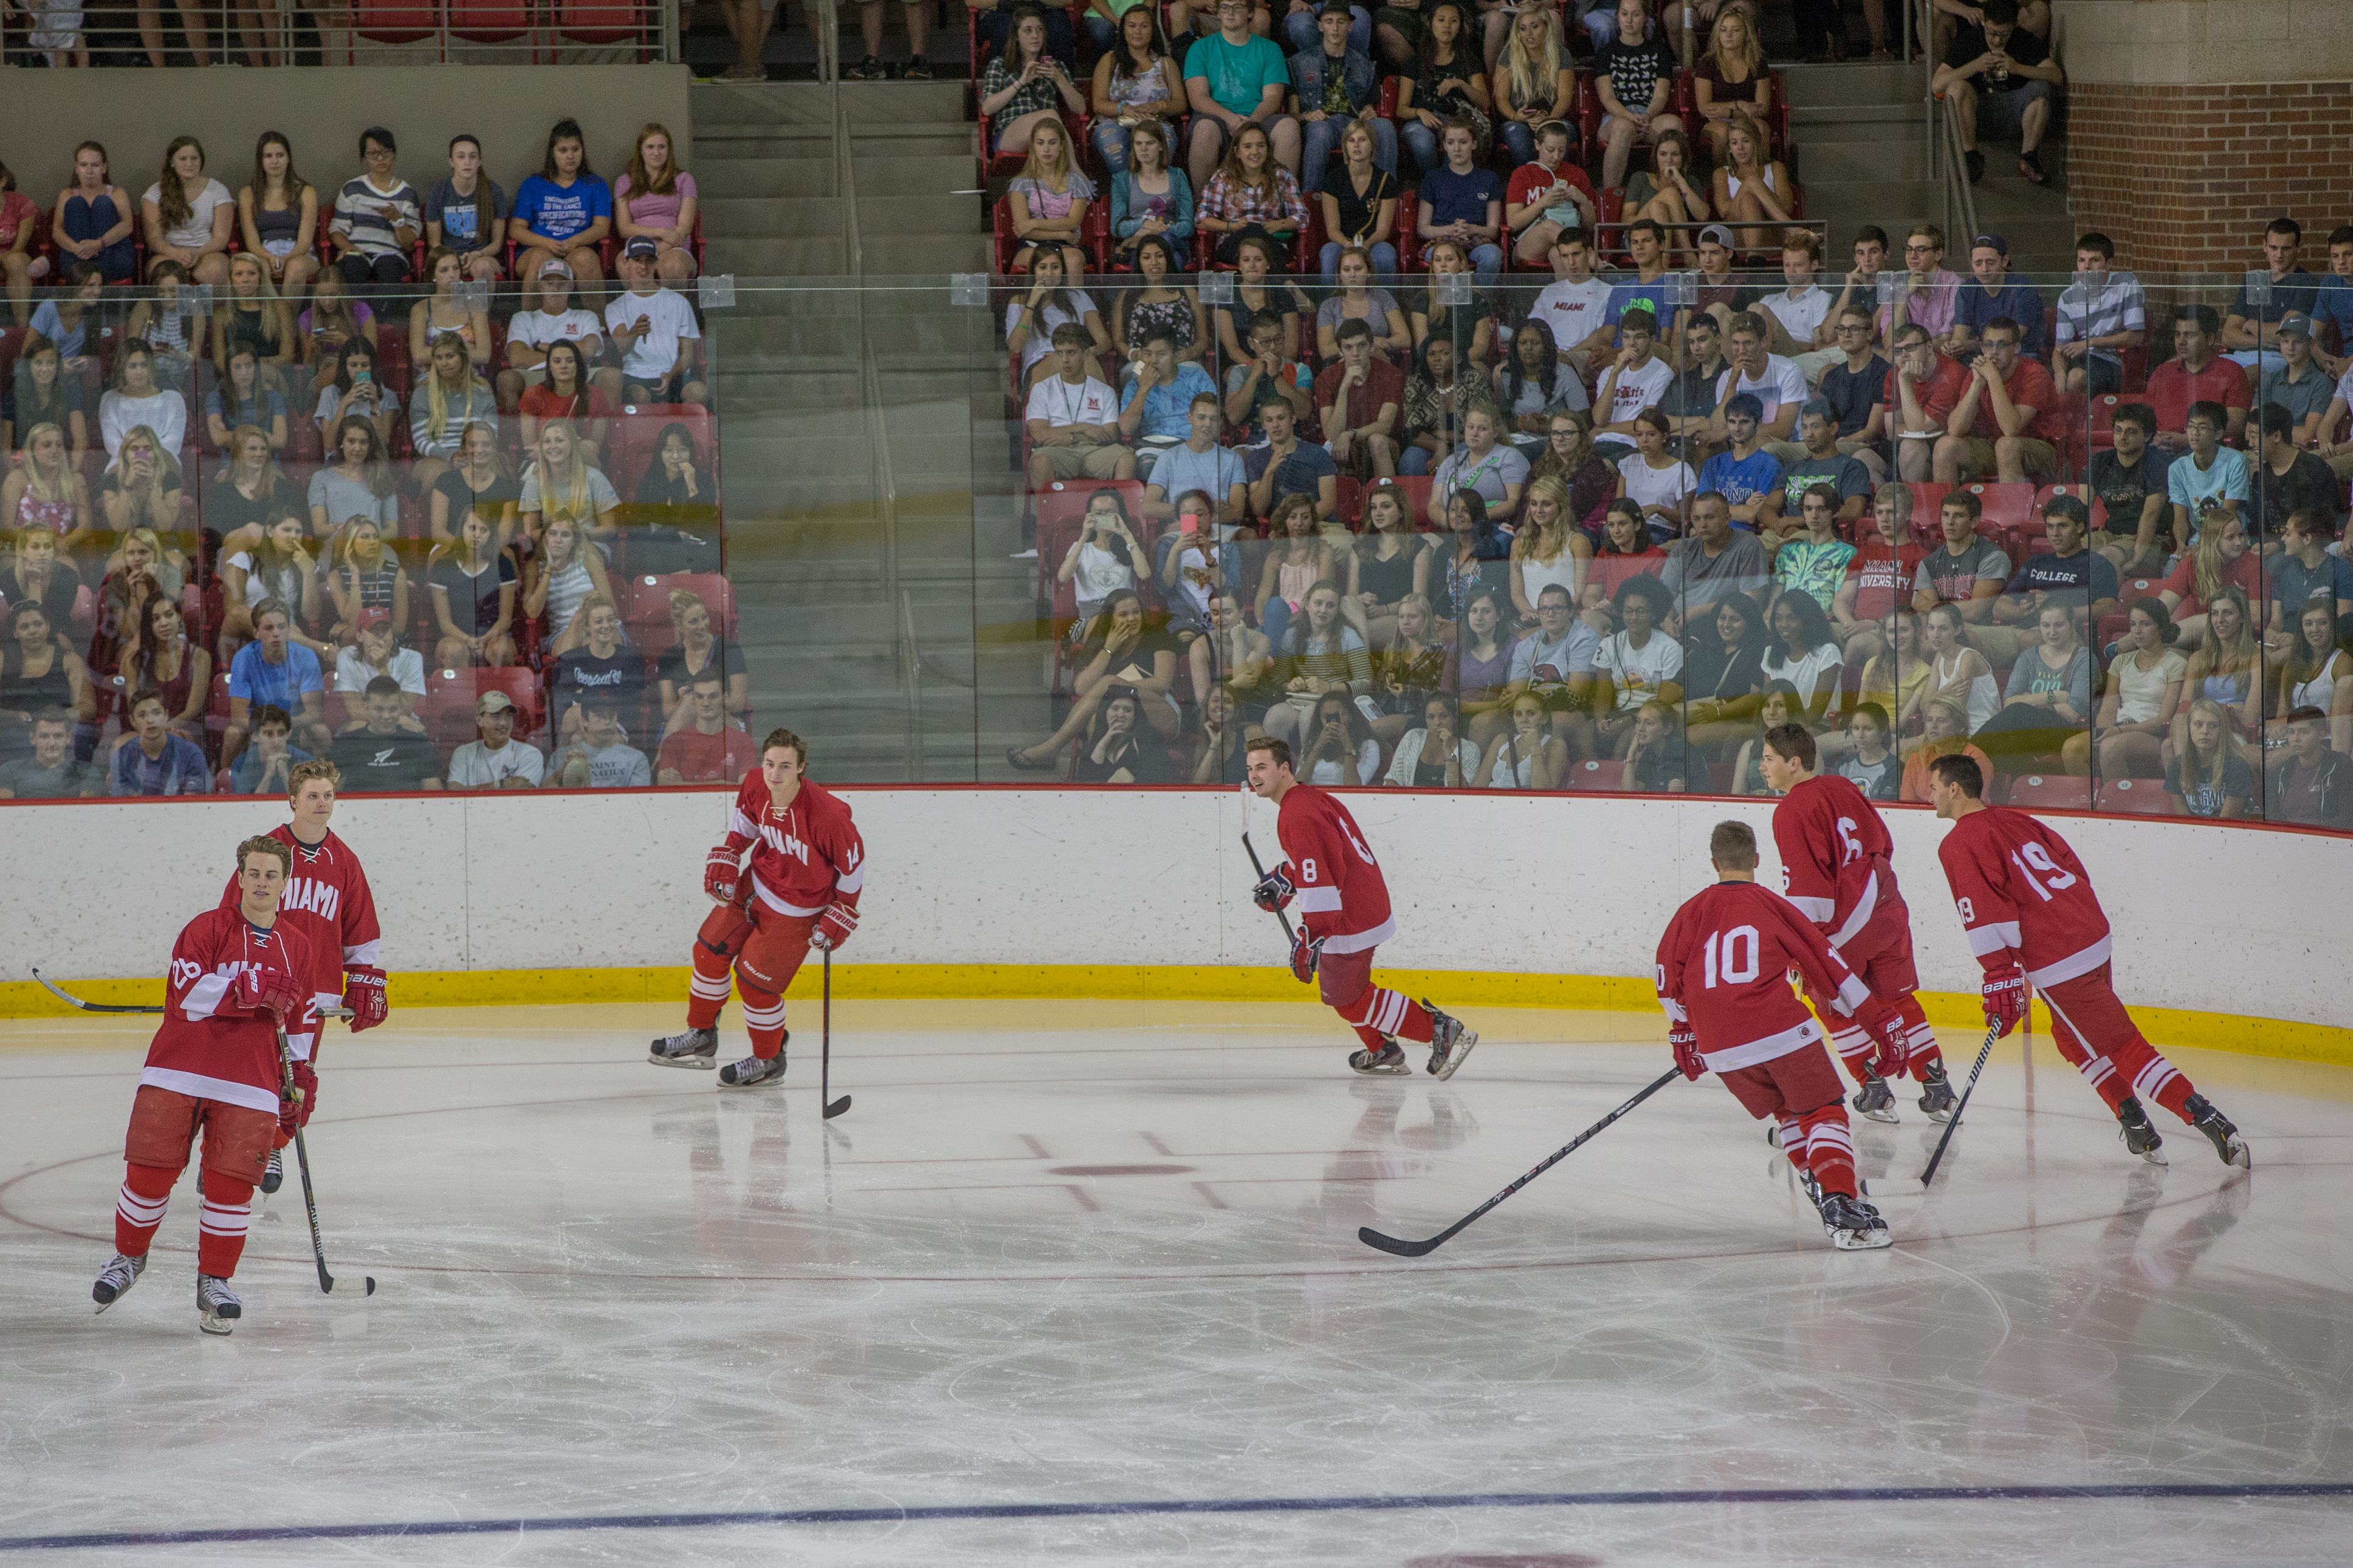 A broomball team playing broomball in Goggin